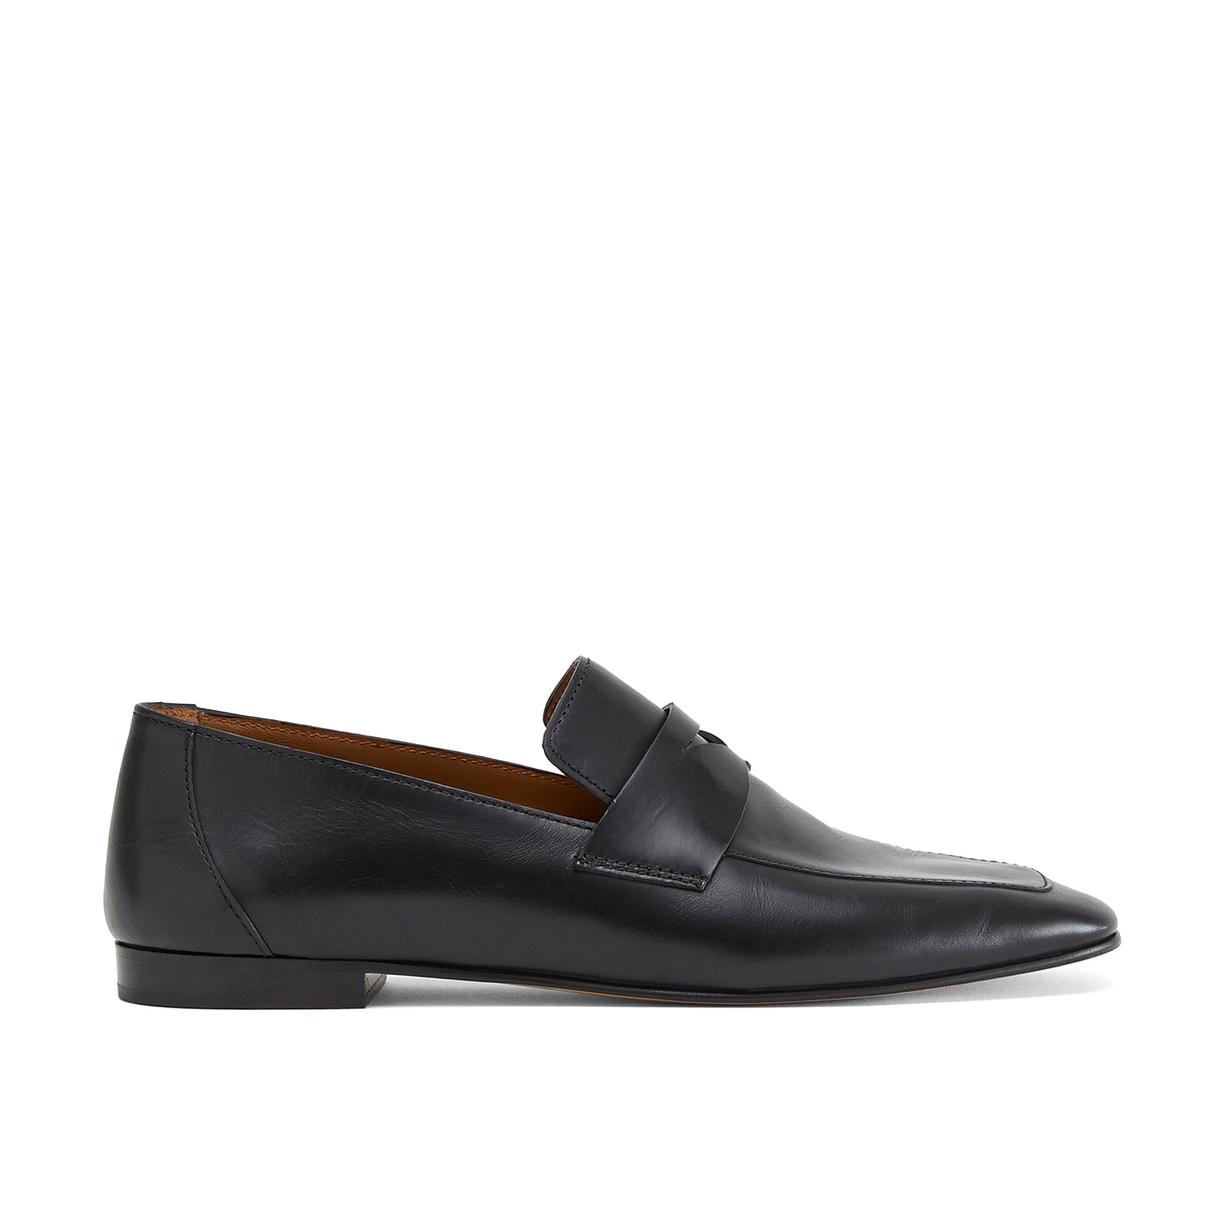 Le Monde Beryl Soft Leather Loafers